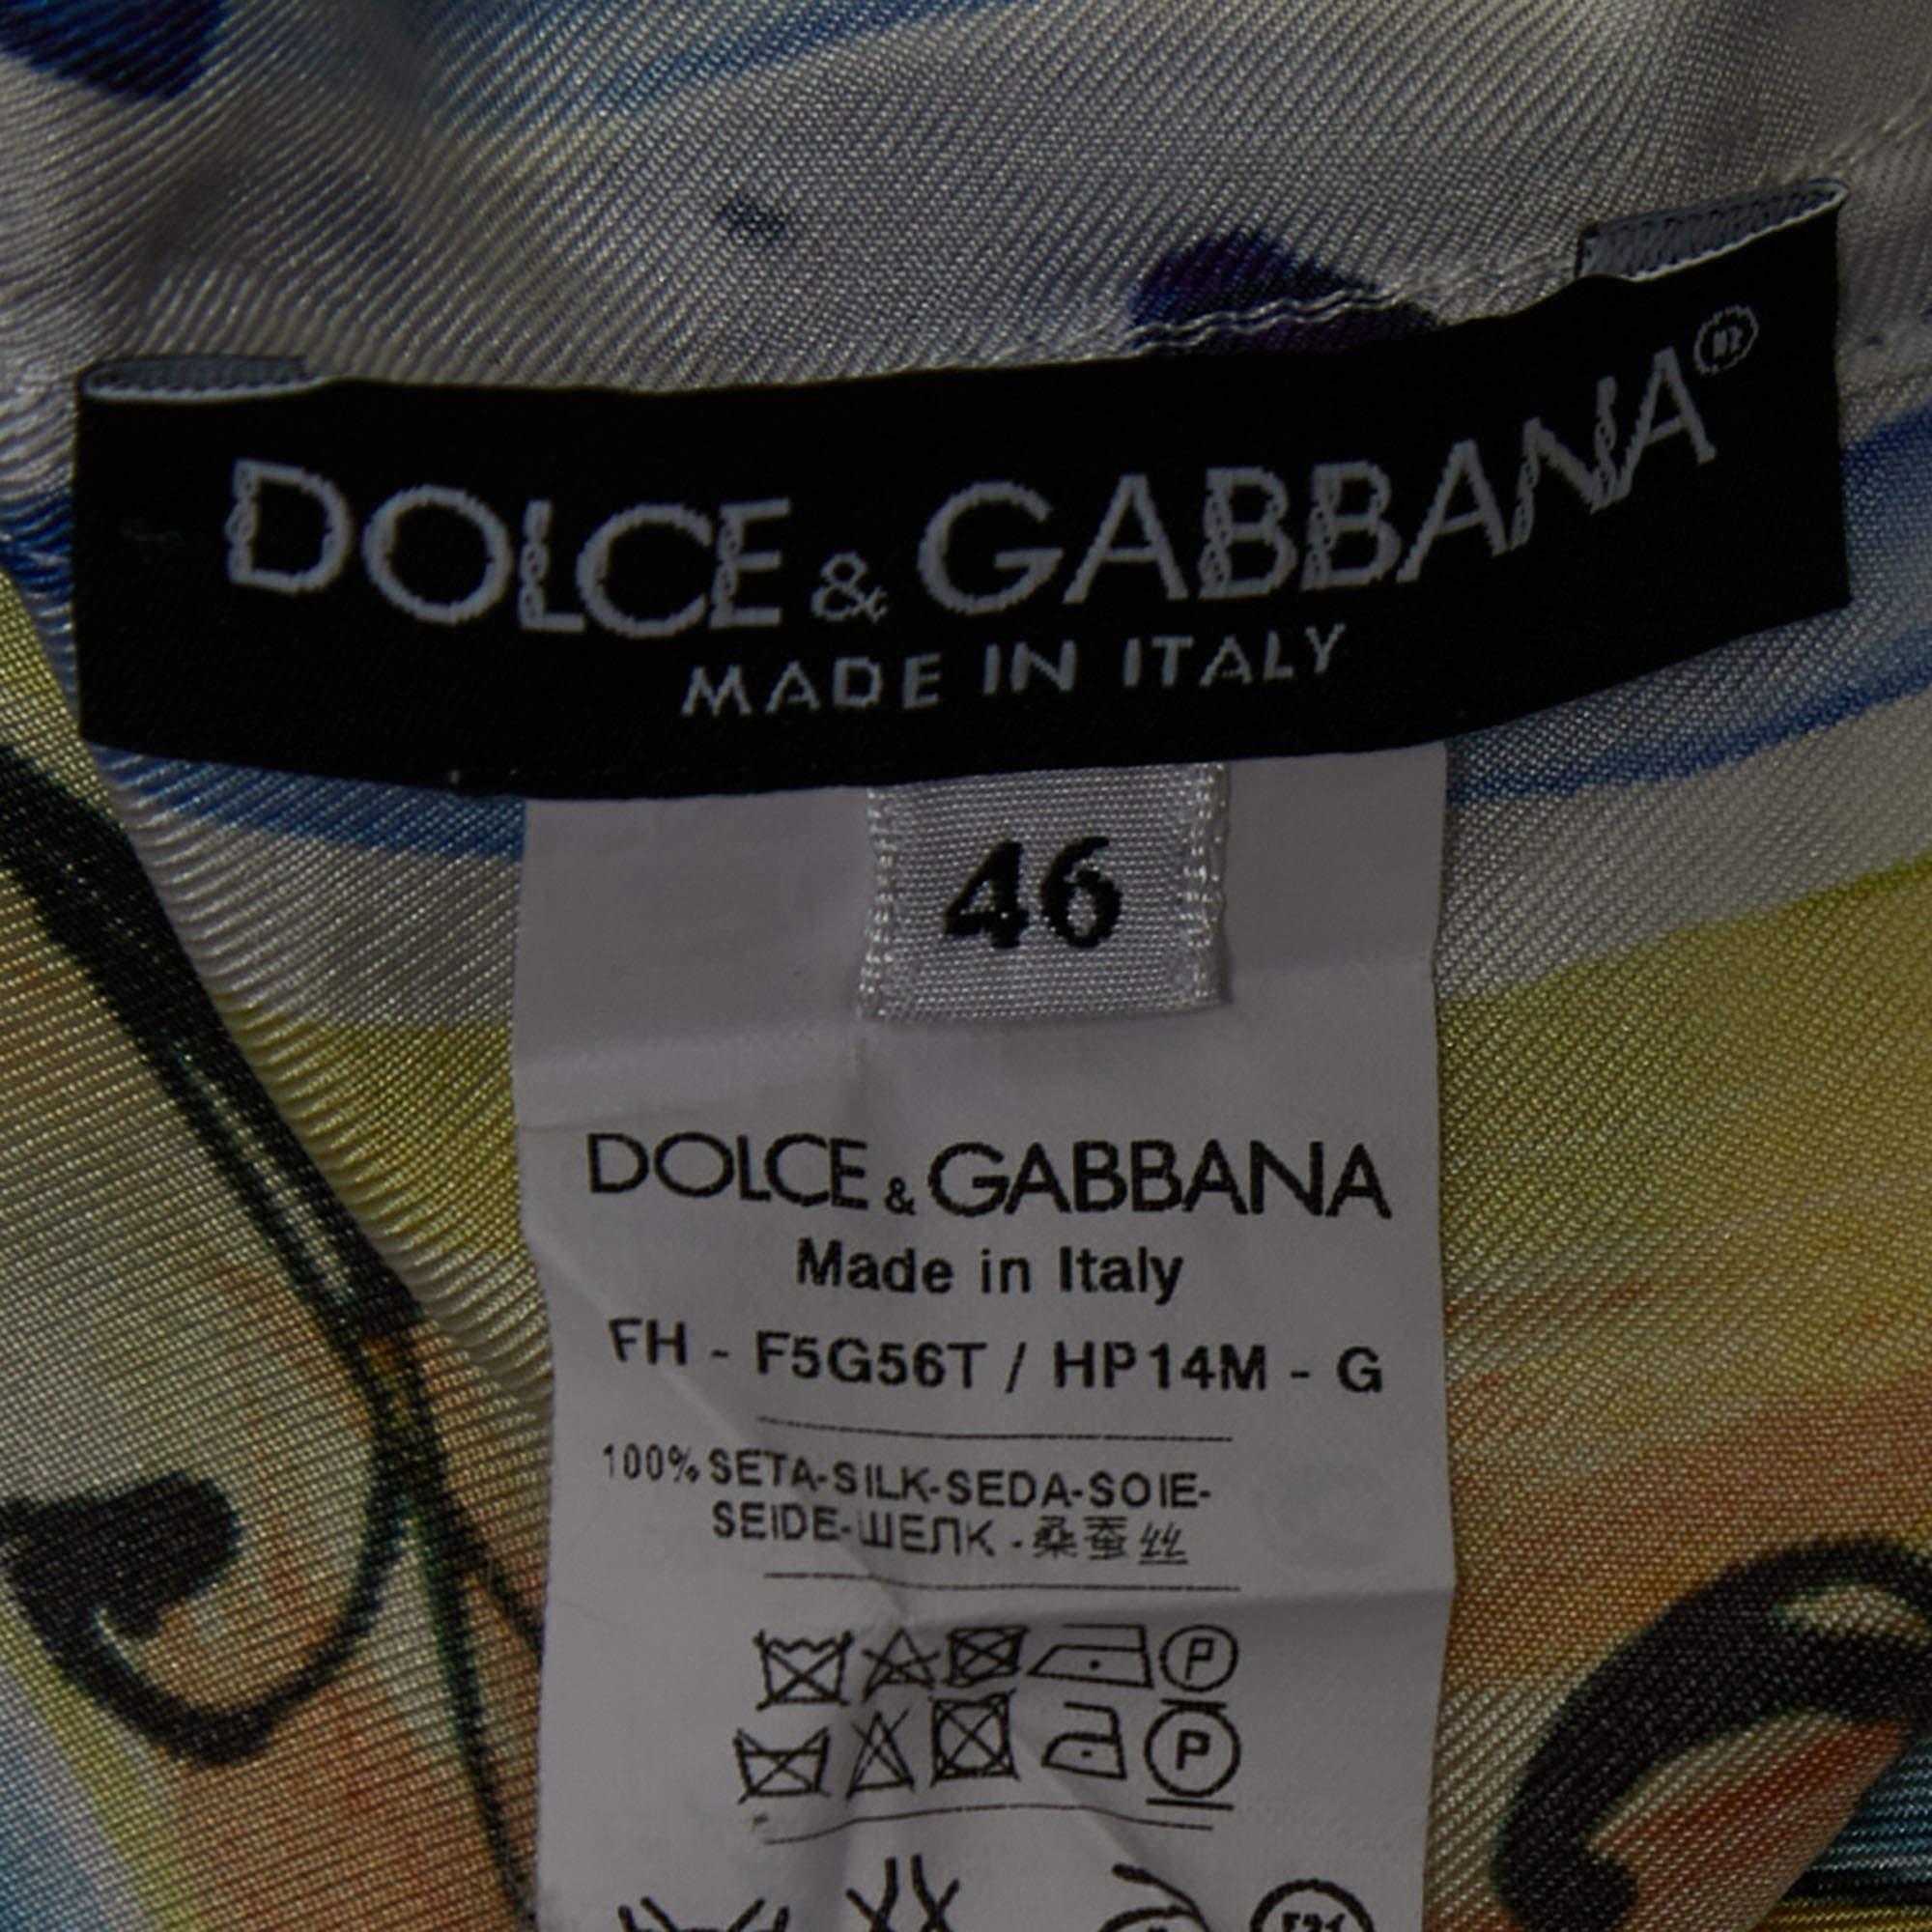 The Dolce & Gabbana shirt is a luxurious fashion piece. Made from fine silk, it features a vibrant and intricate Majolica tile-inspired print with bold, multicolored patterns. The shirt boasts a relaxed fit, button-down front, and a classic collar,